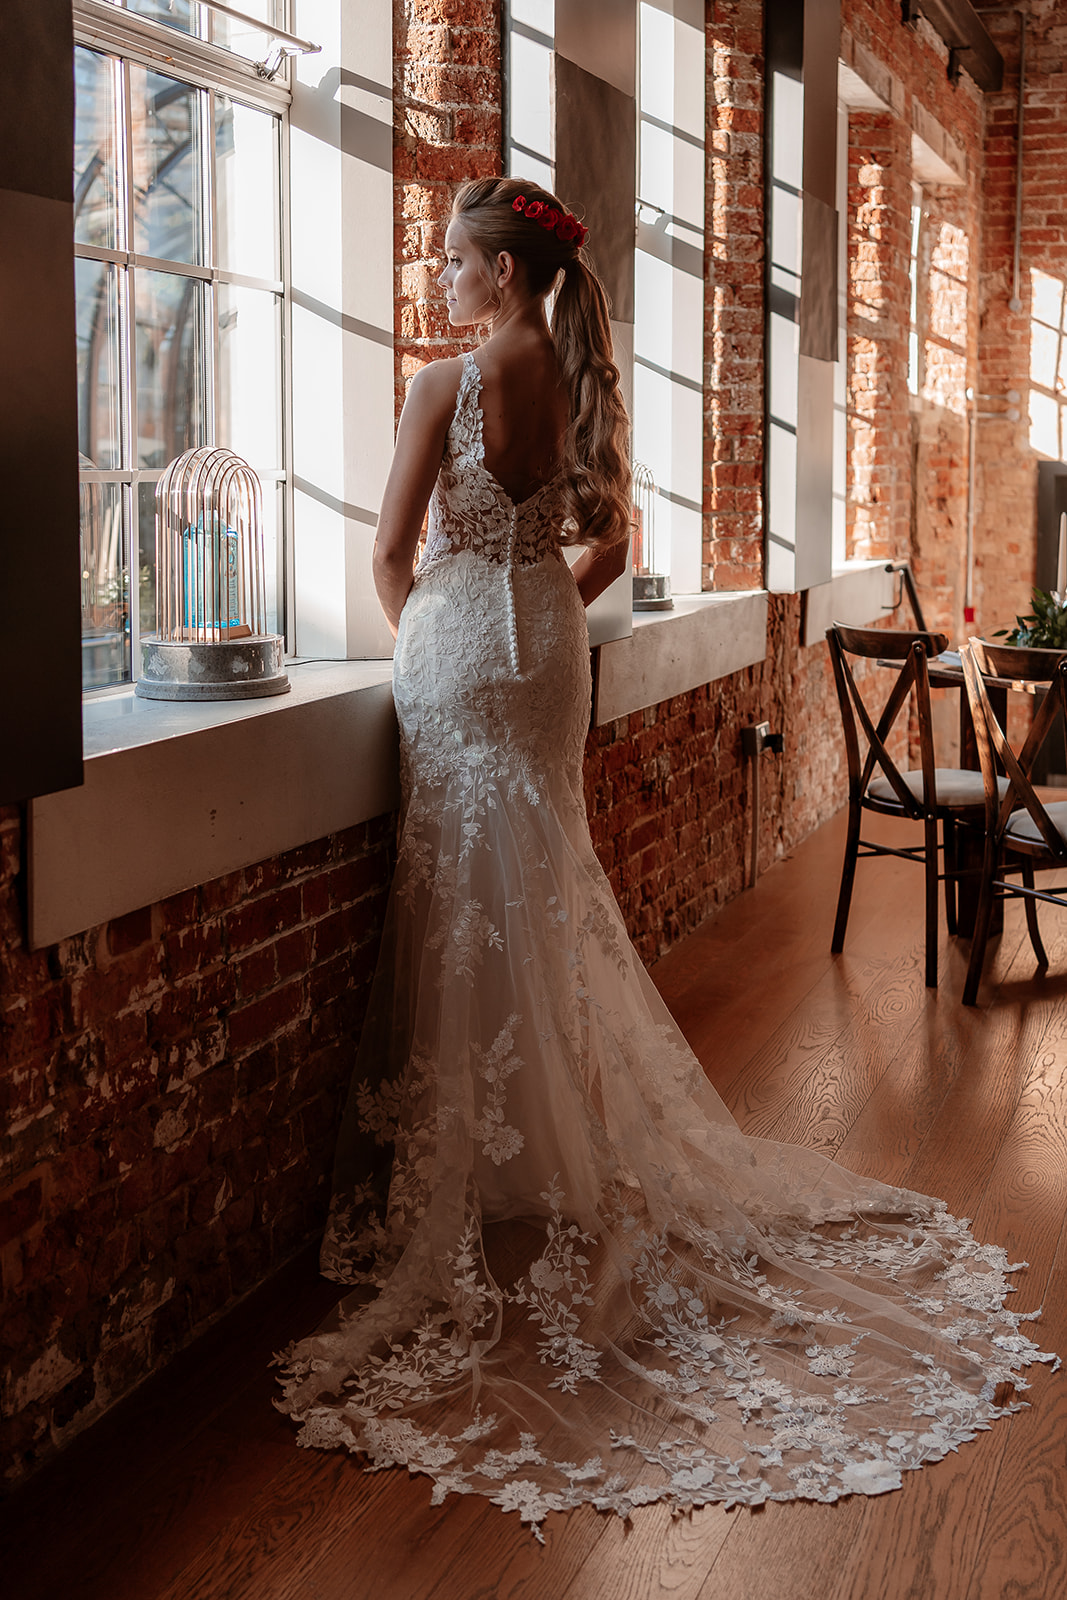 Bride in a white lace dress stands and looks out the window at the Bombay Sapphire Distillery.